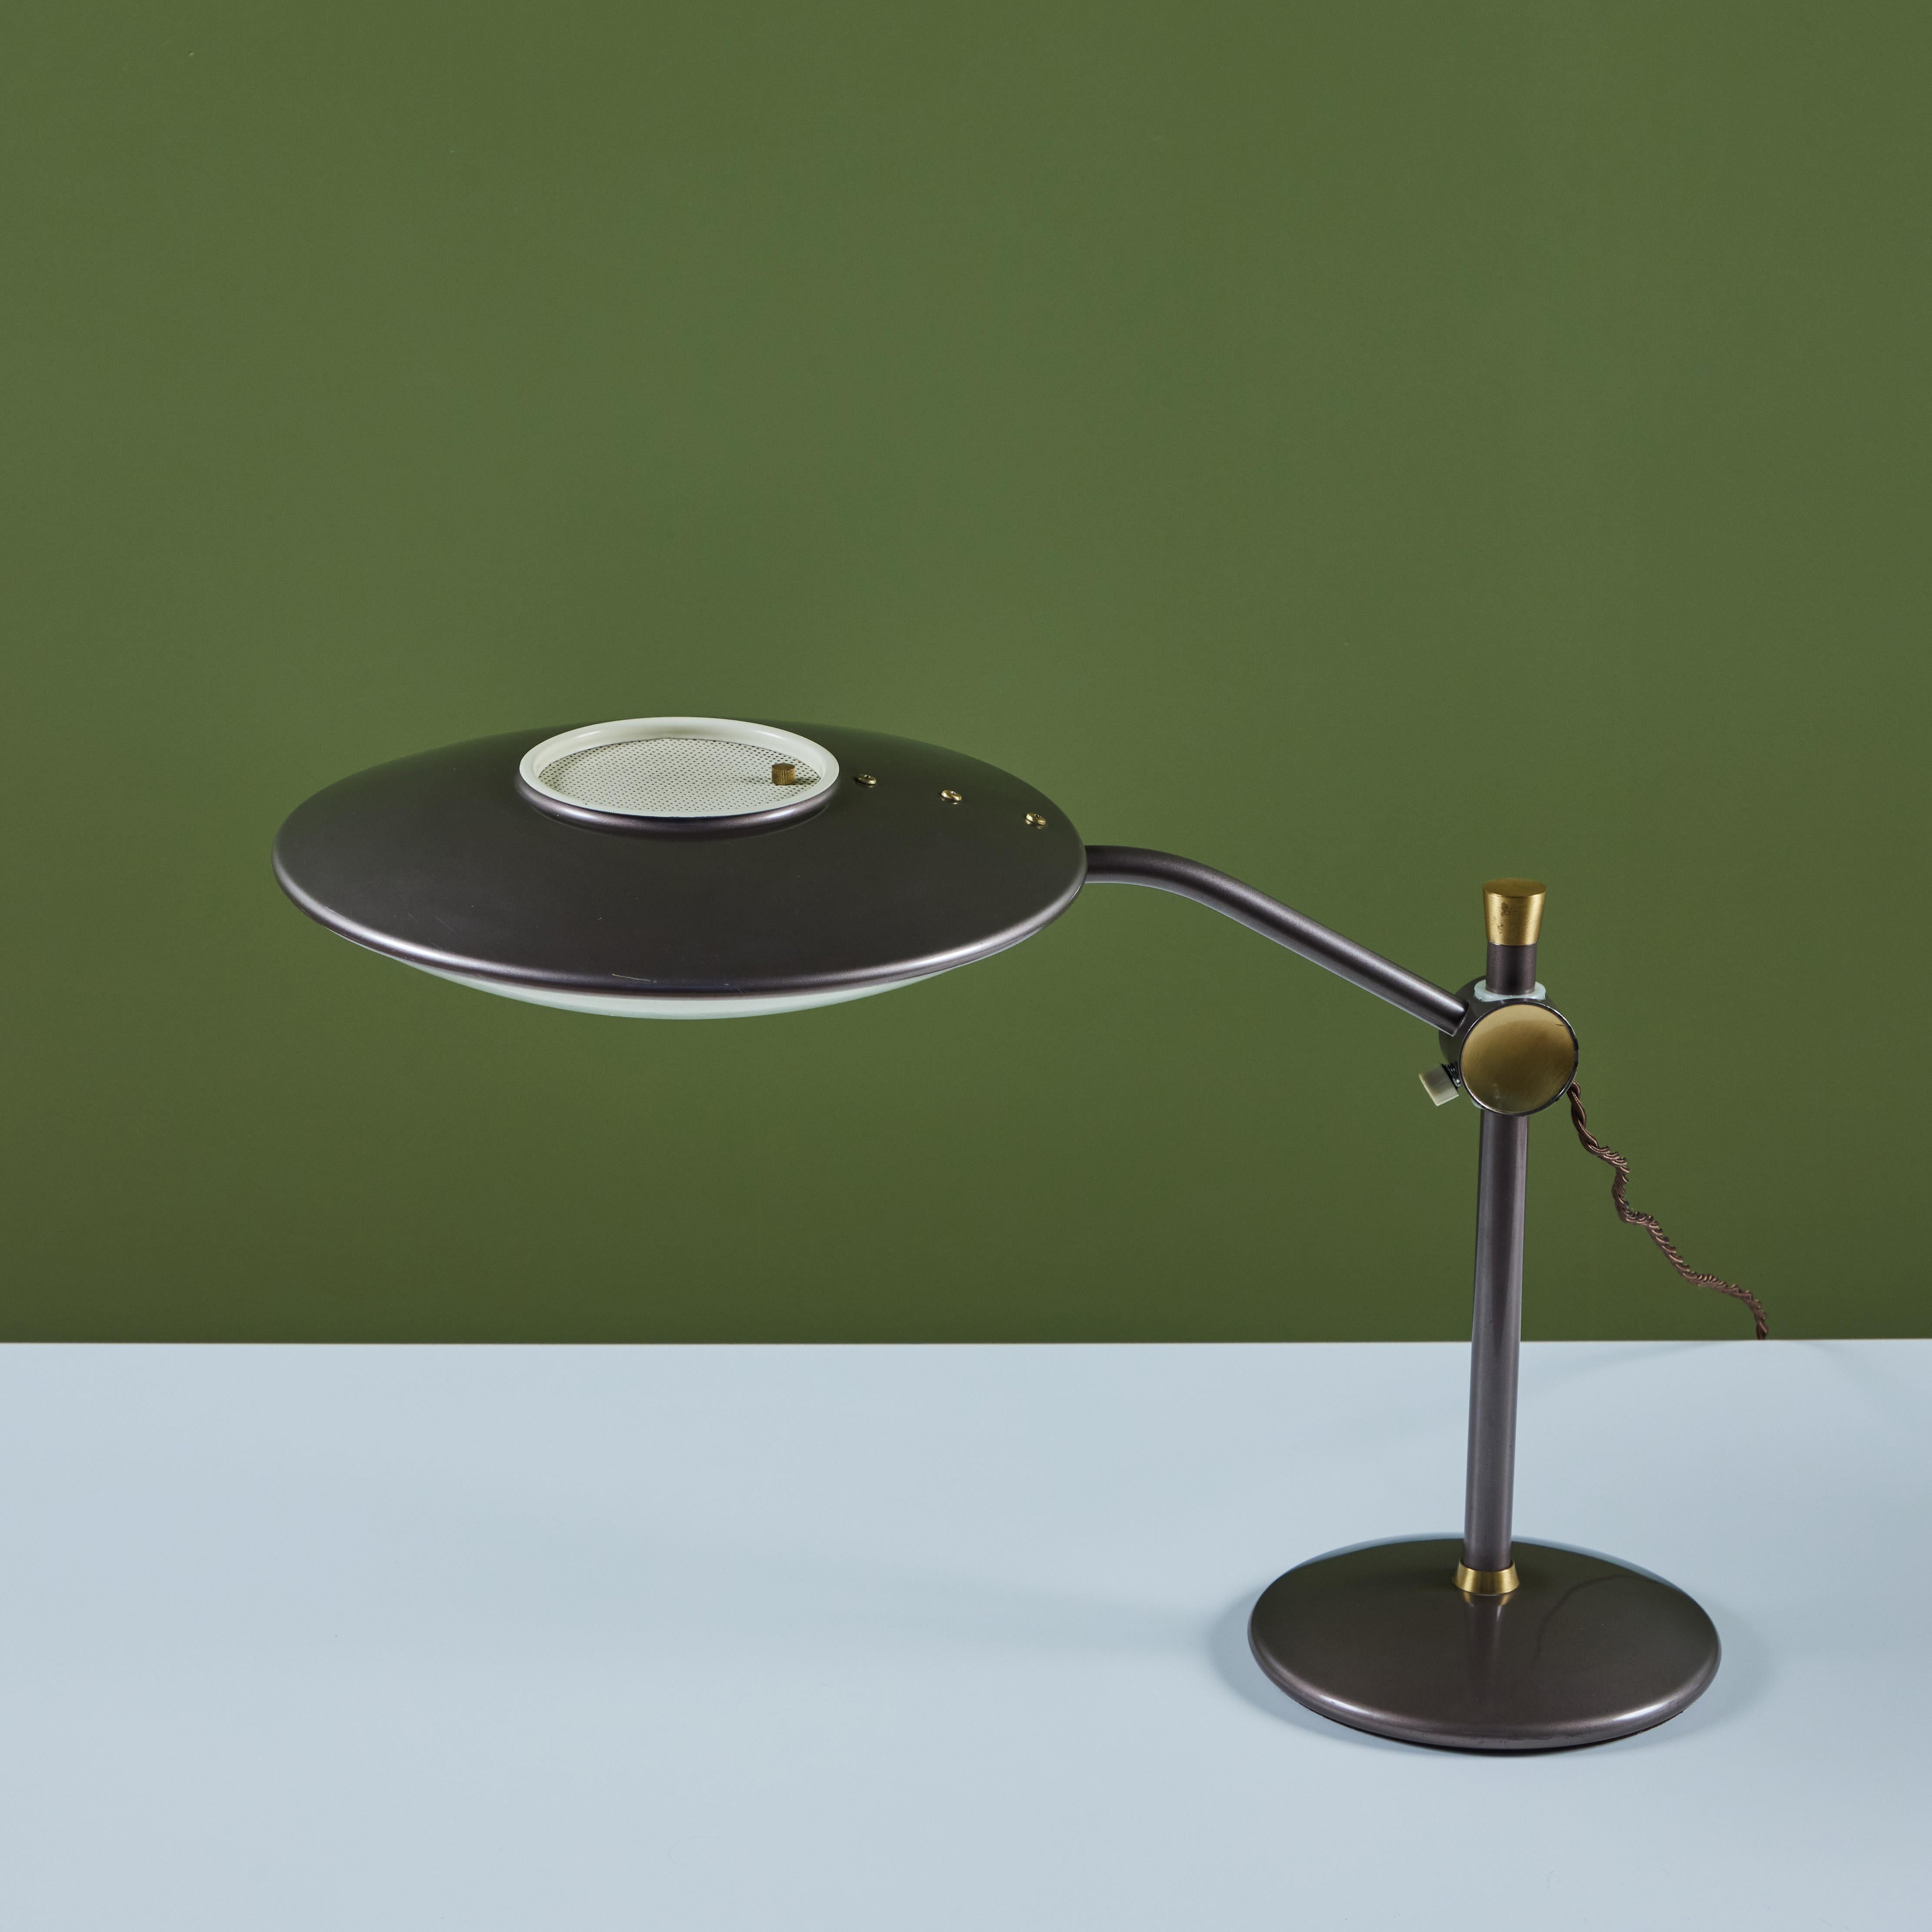 Mid-20th Century Dazor Taupe Enamel Desk Lamp with Brass Accents For Sale